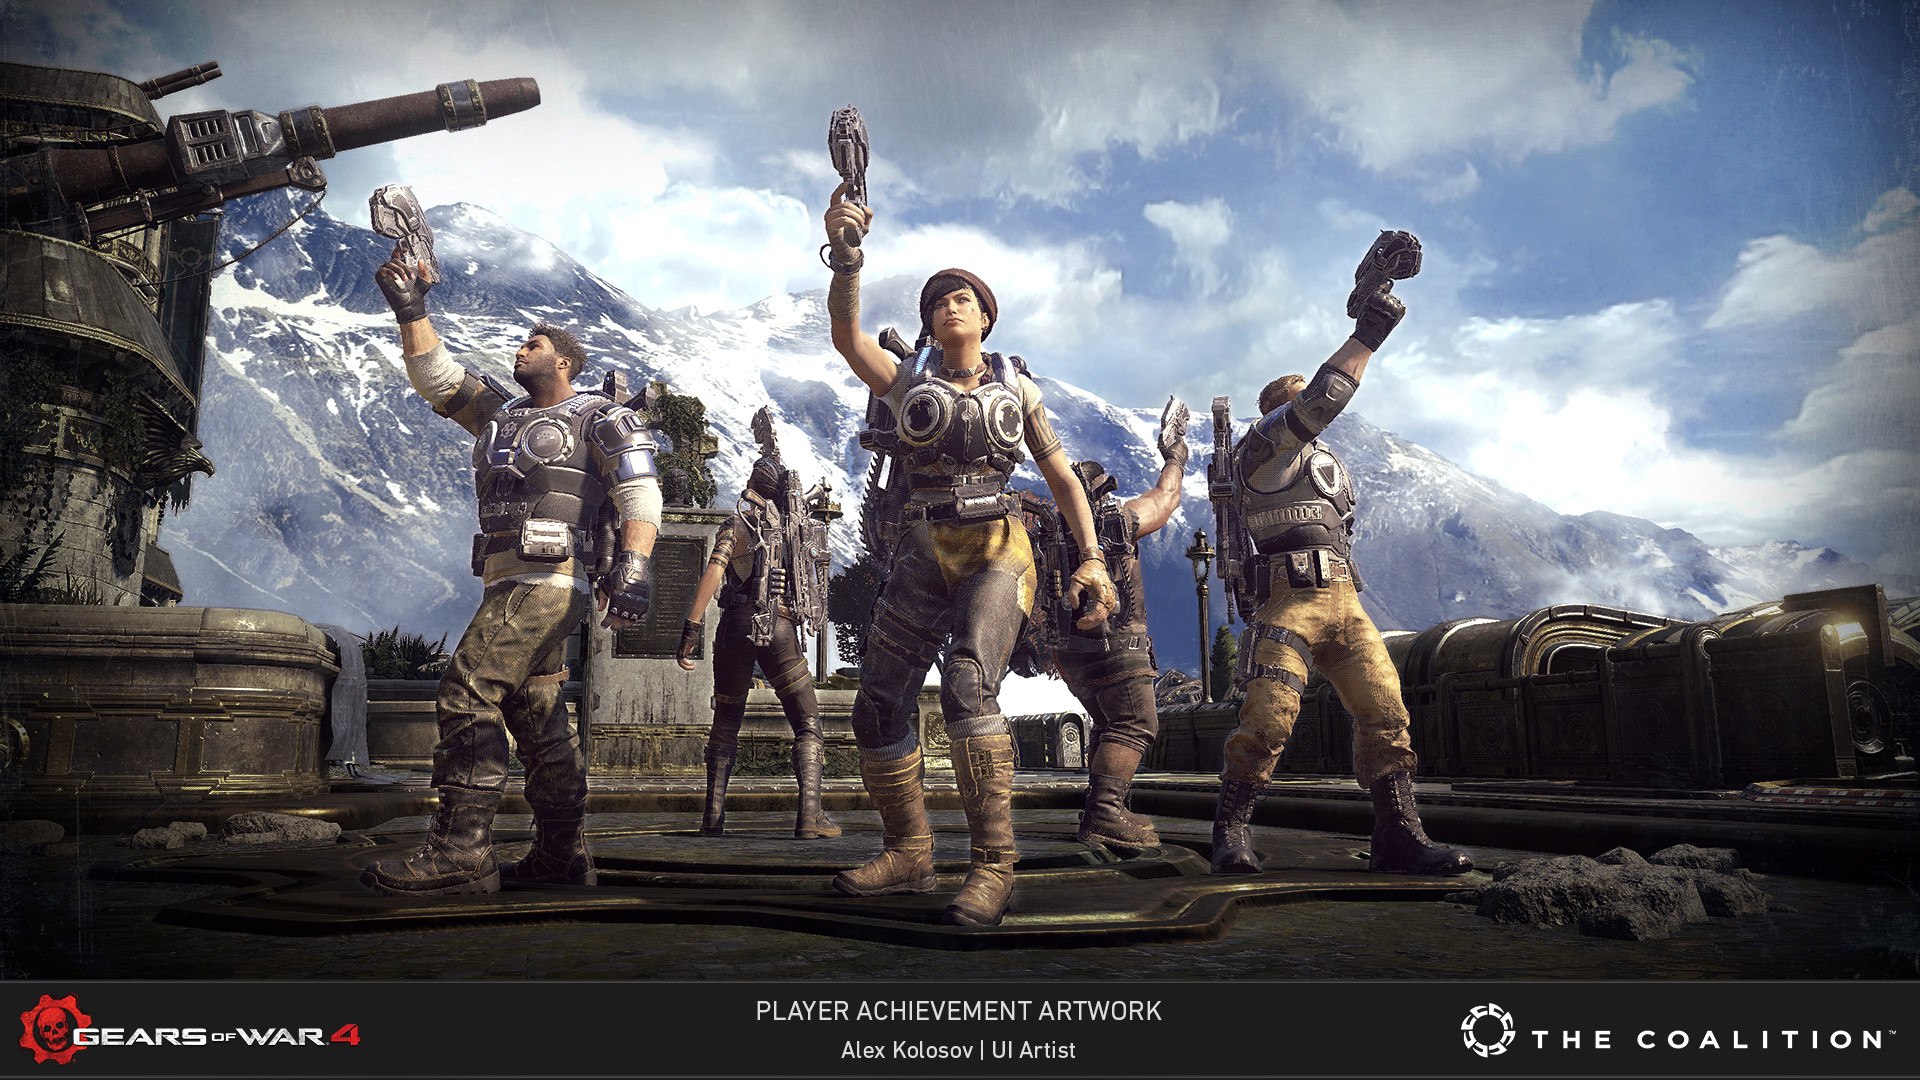 You Are The Support Son! achievement in Gears of War 4